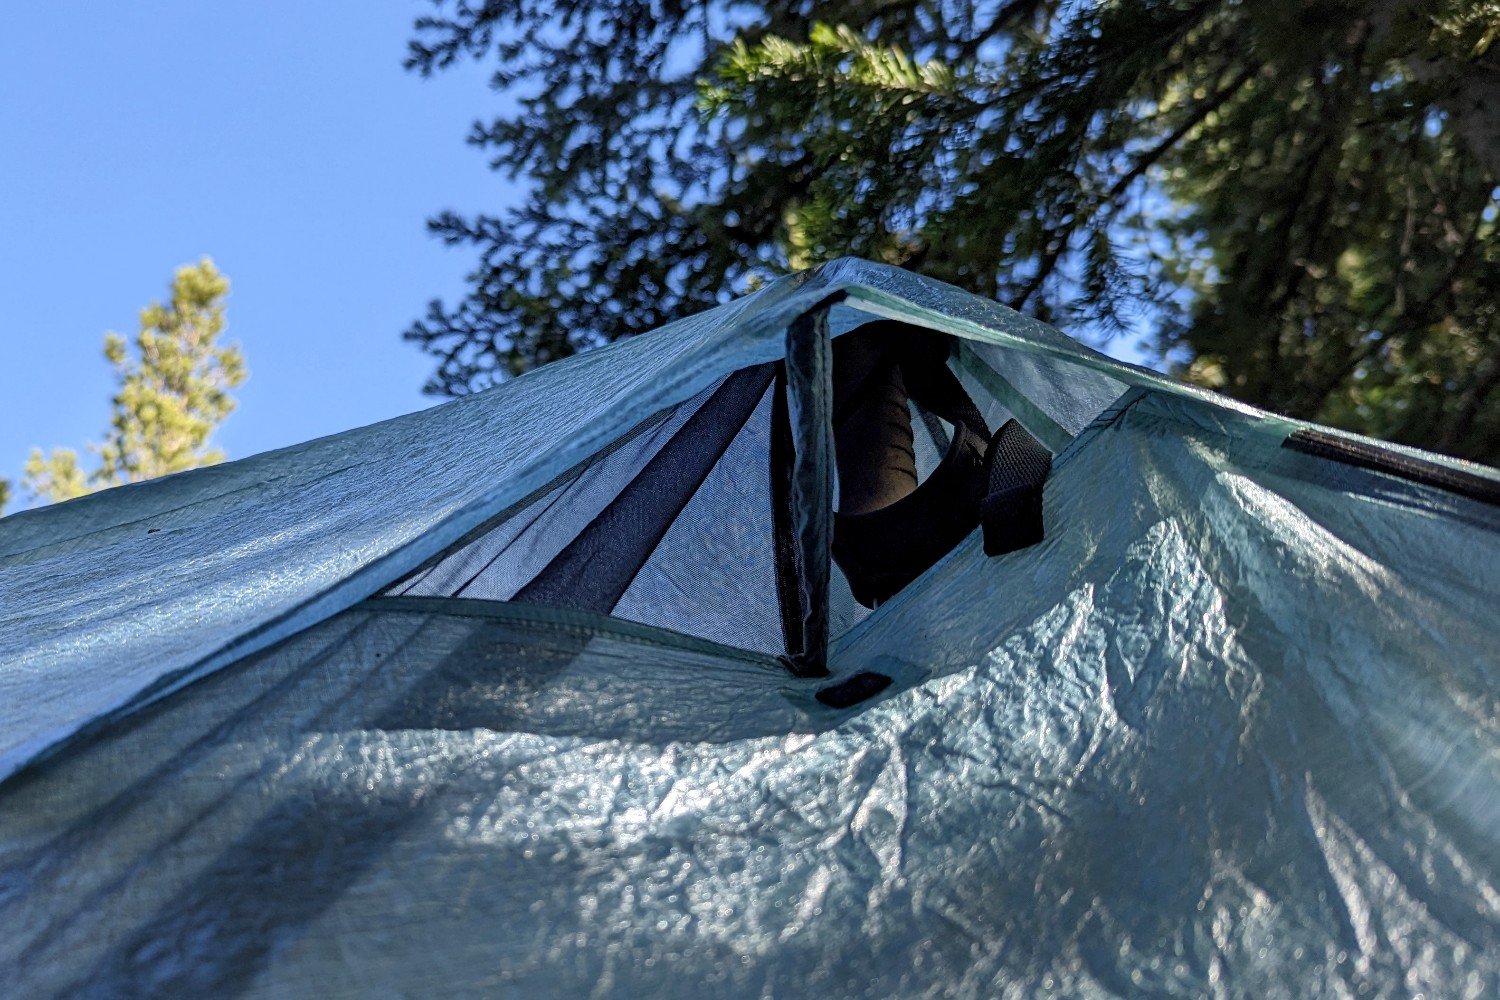 A close up view of the open peak vent on the Durston X-Mid 2 Pro tent